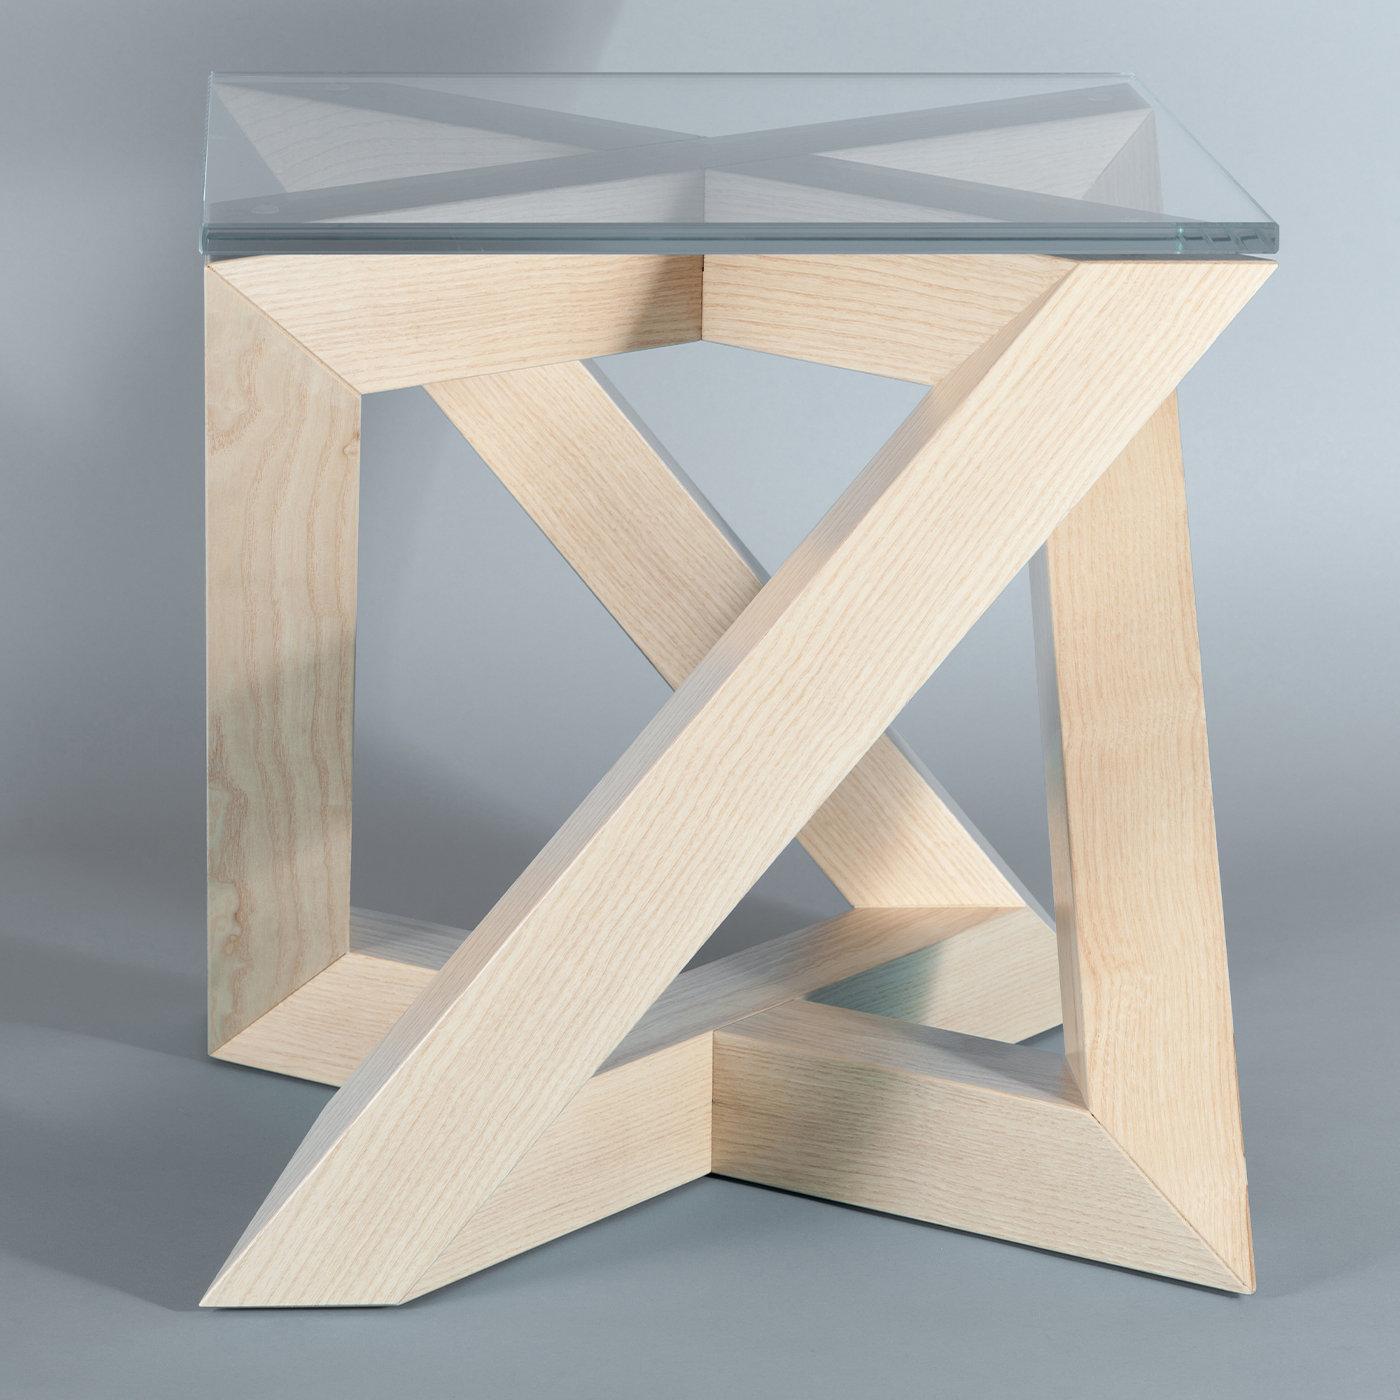 A highly geometrical and architectural work of art, this design by Antonio Saporito will make a singular statement in a contemporary home or contract area. A side table of strong visual impact, it rests on a wooden base defined by rigorous and